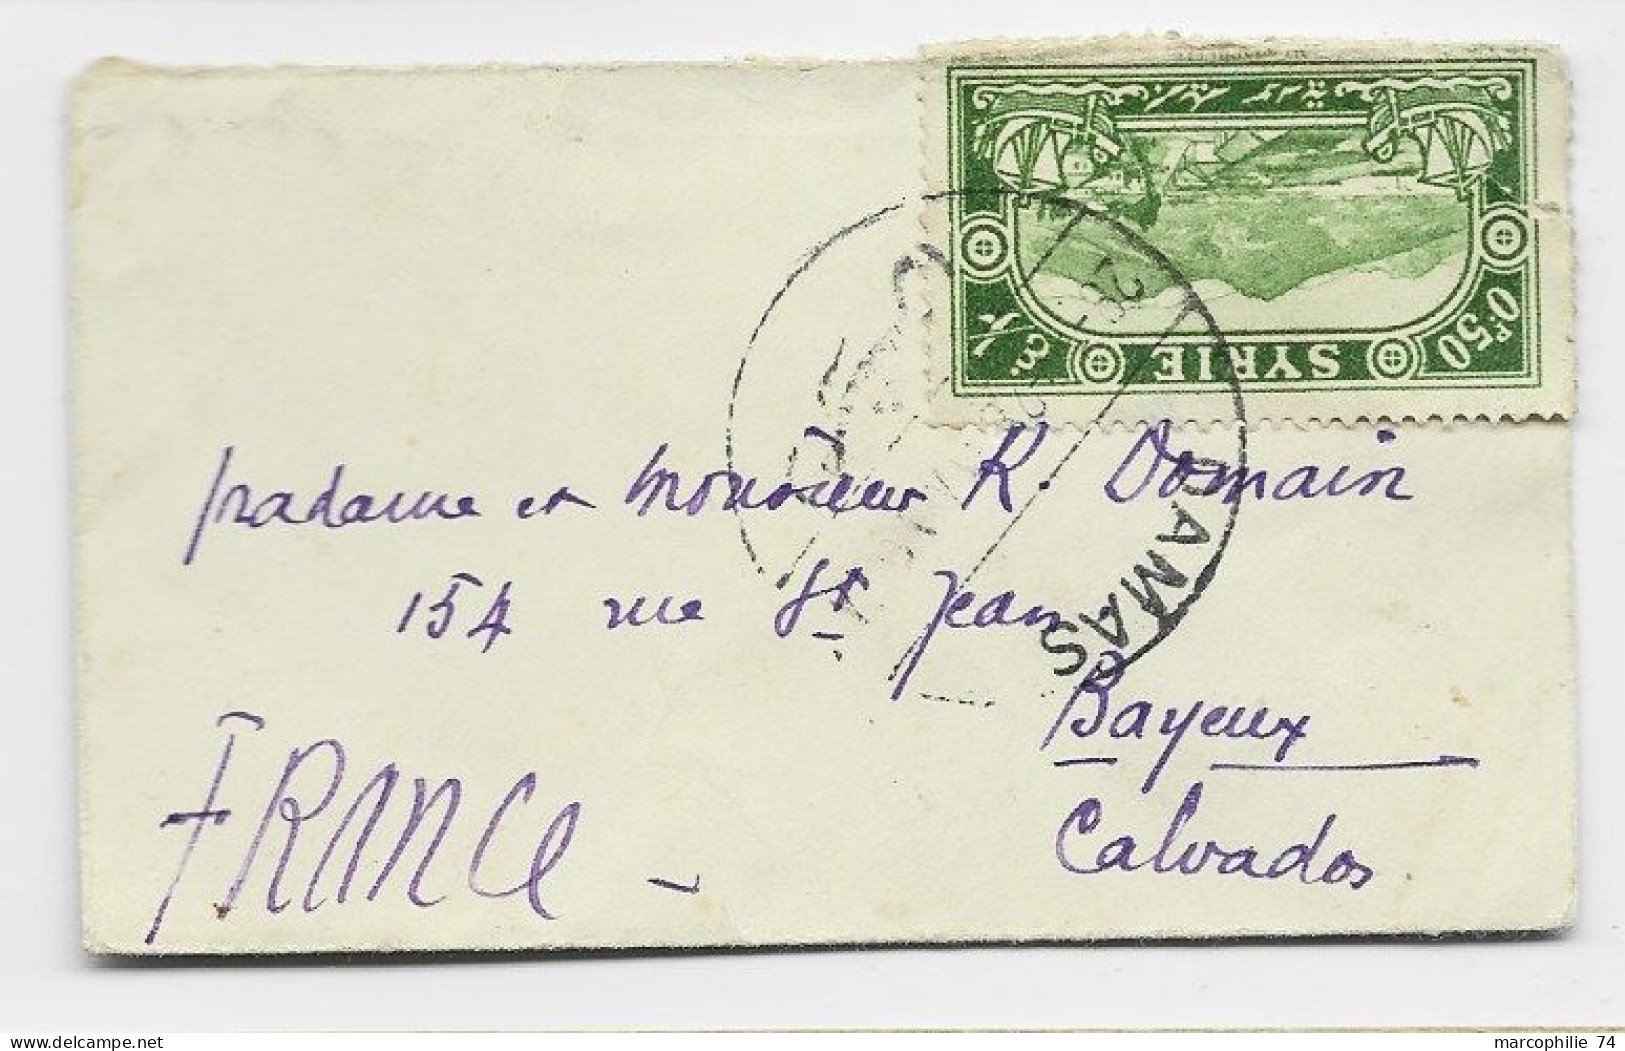 SYRIA SYRIE 2P+1P+0P50 AU VERSO MIGNONNETTE SMALL COVER + RECTO 0.P50 DAMAS 1928 TO FRANCE - Covers & Documents